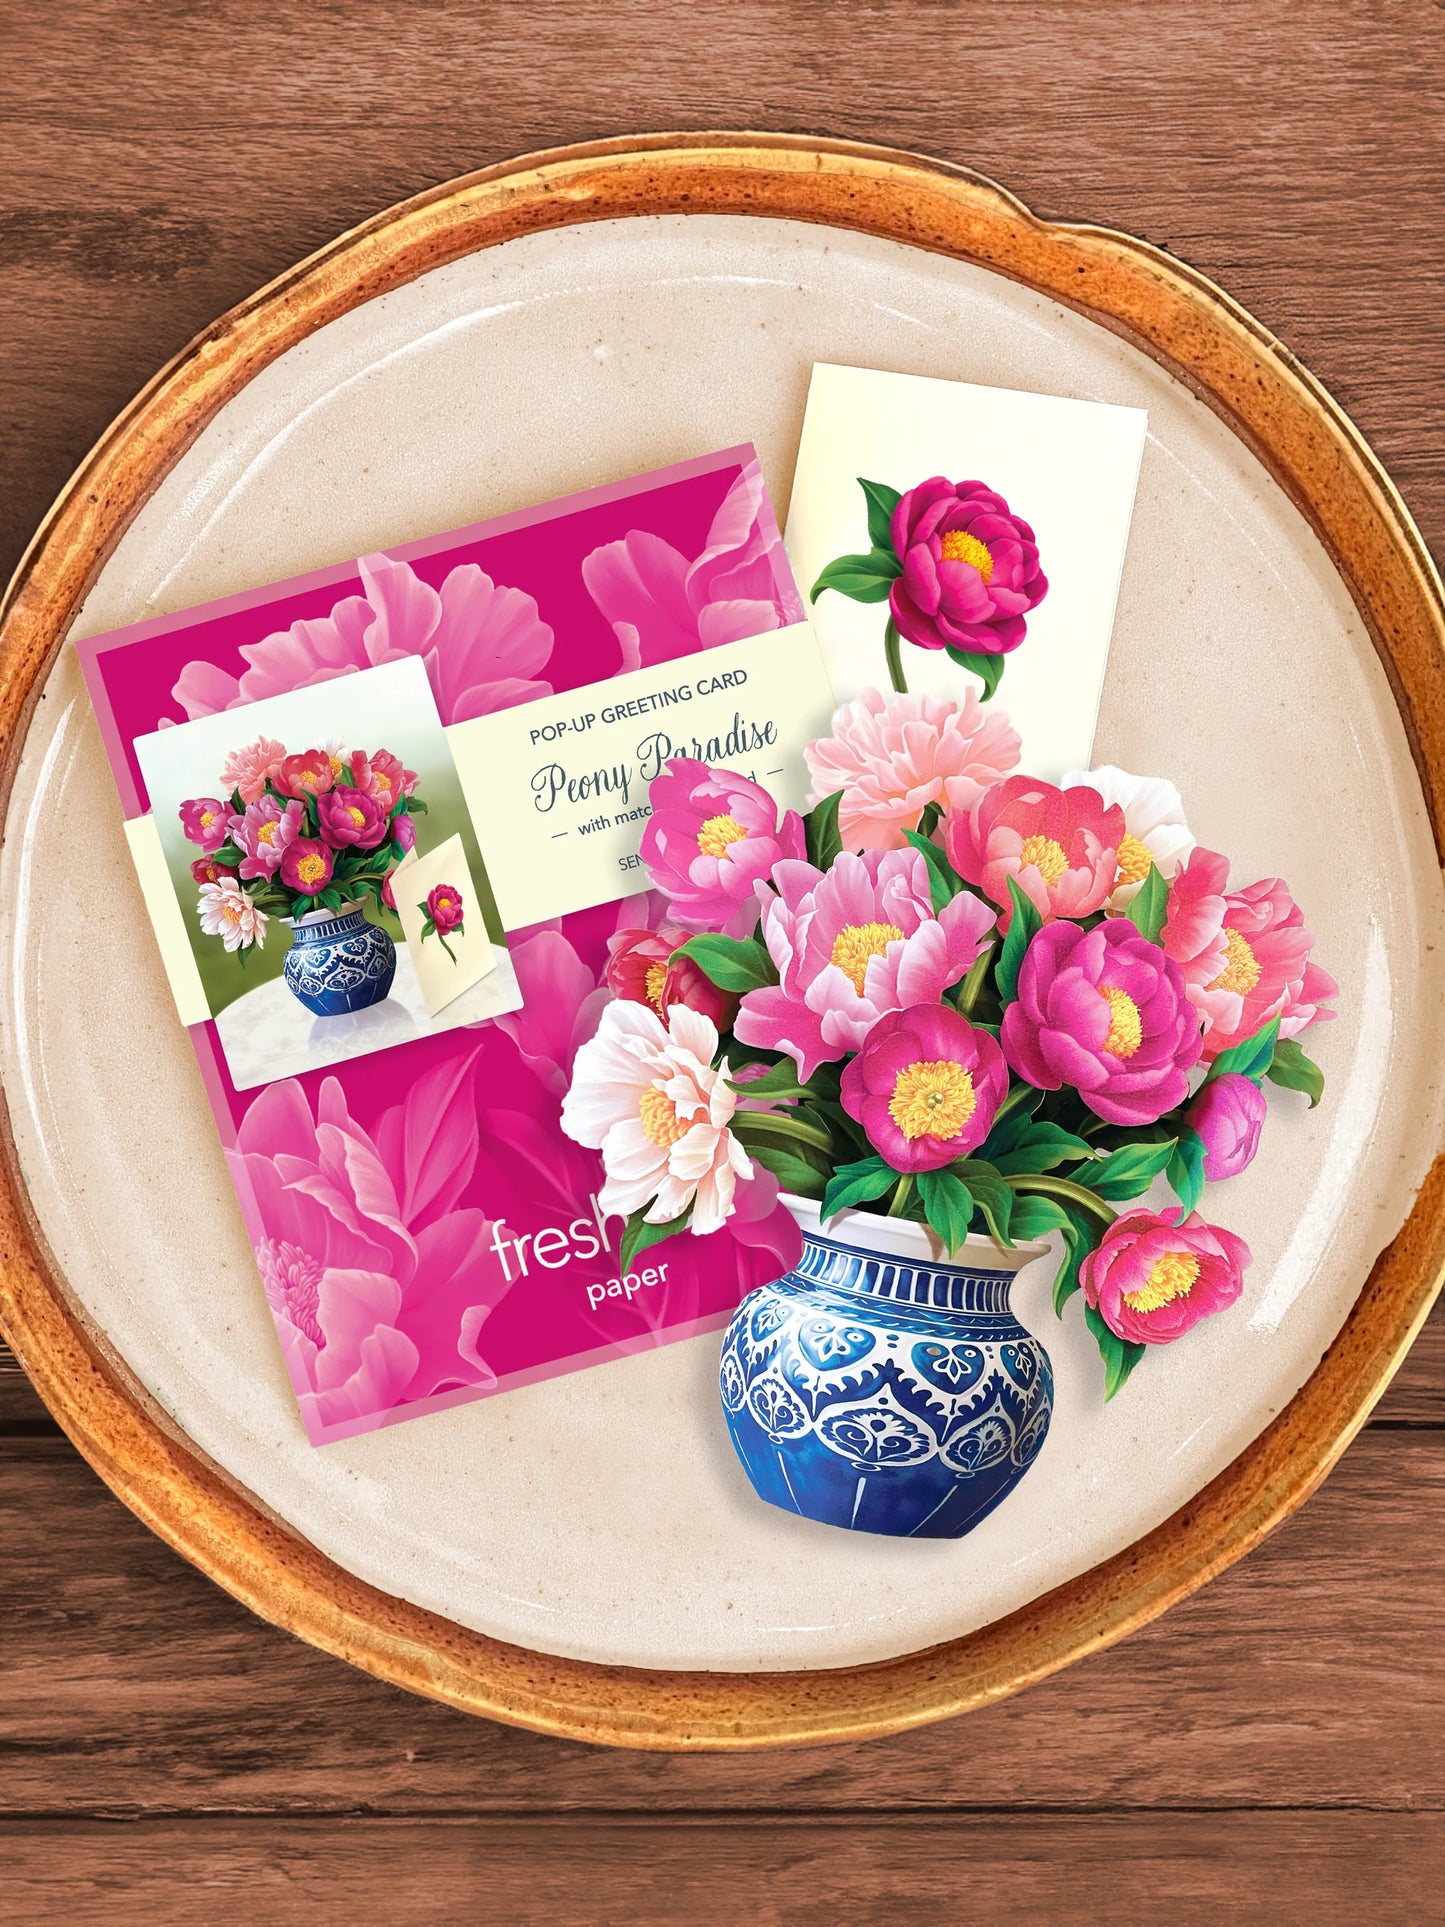 Peony Paradise bouquet, enclosure card, and mailing envelope arranged on a tray.